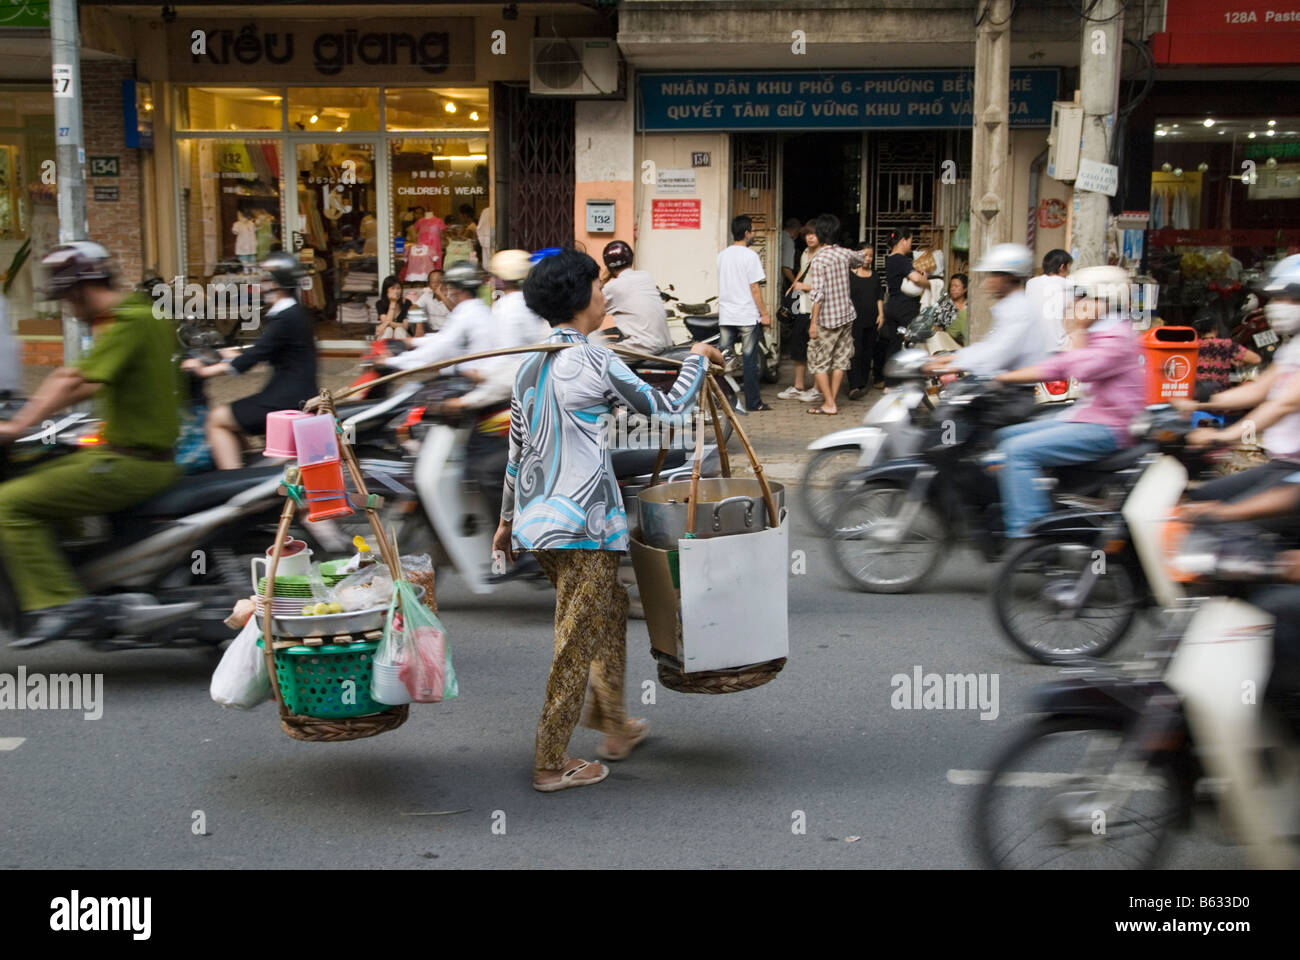 Vietnamese street trader walks across the street through the blur off busy traffic in chaotic Ho Chi Minh City, Vietnam Stock Photo